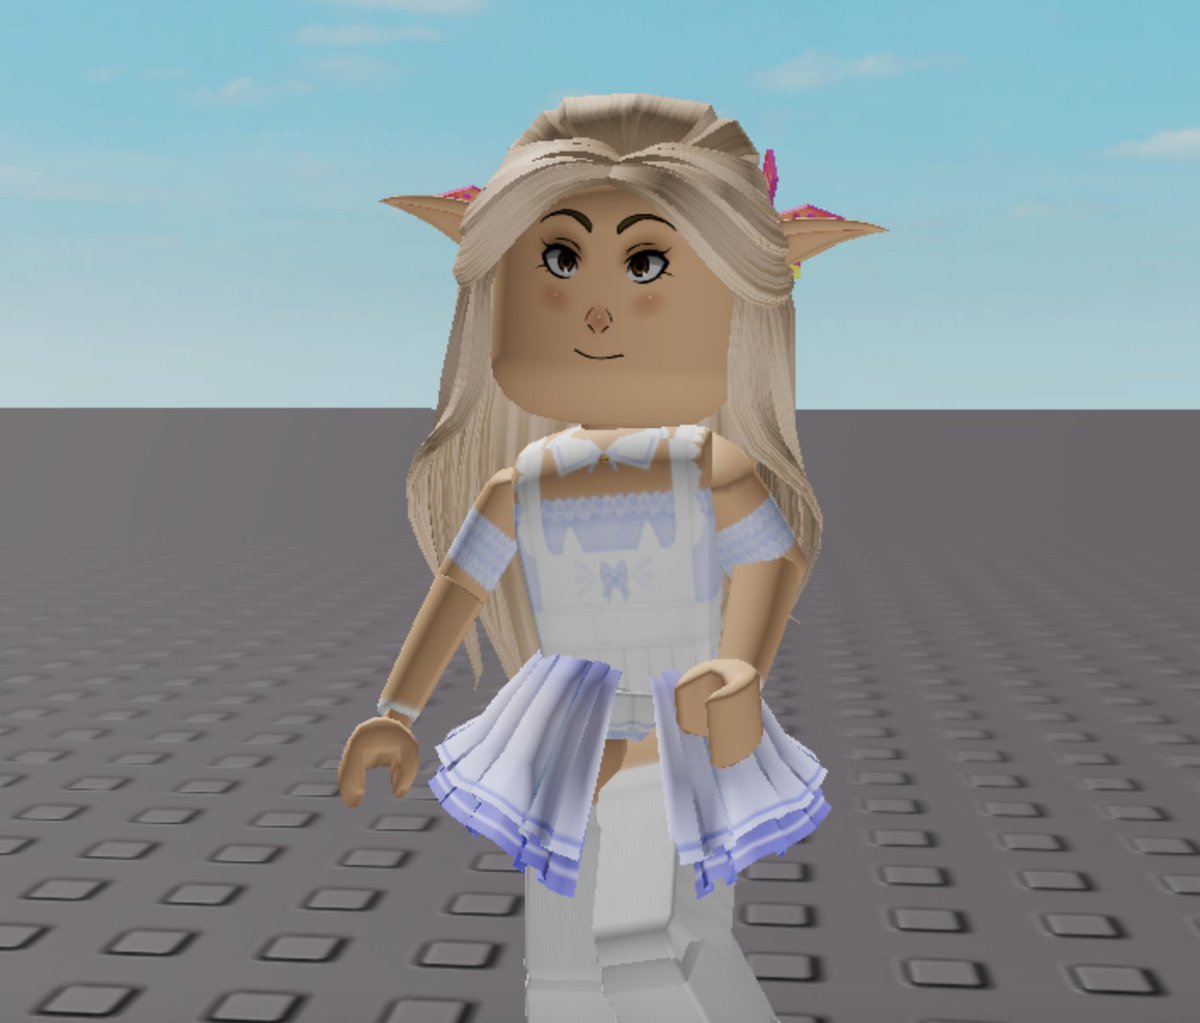 Beeism On Twitter Green Would Be Sooo Pretty Hhmm What Color Butterflies Would Go With A Soft Mint Green Color Oohh Maybe Pastel Yellow And Peach Https T Co Ujheoi9k0h - pastel yellow roblox yellow logo